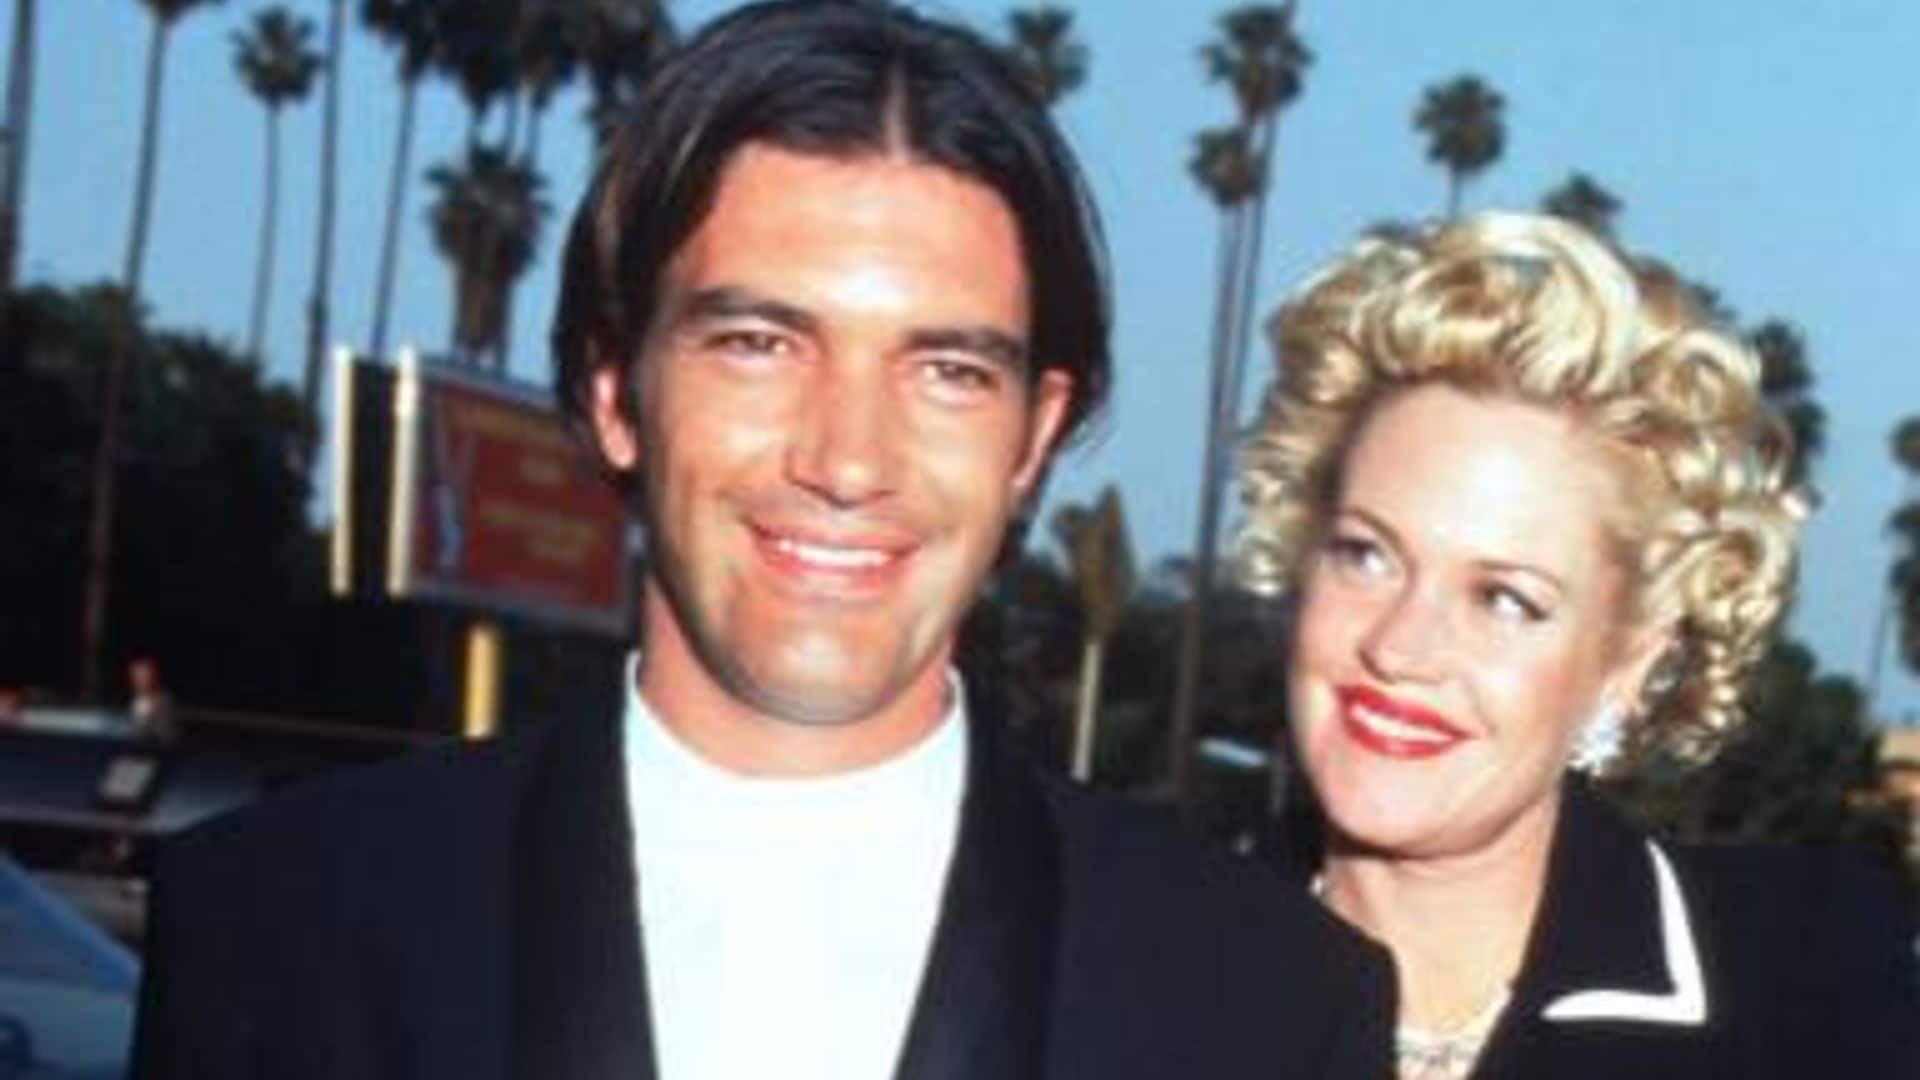 Antonio Banderas on the ‘most beautiful thing’ he ever did with ex-wife Melanie Griffith